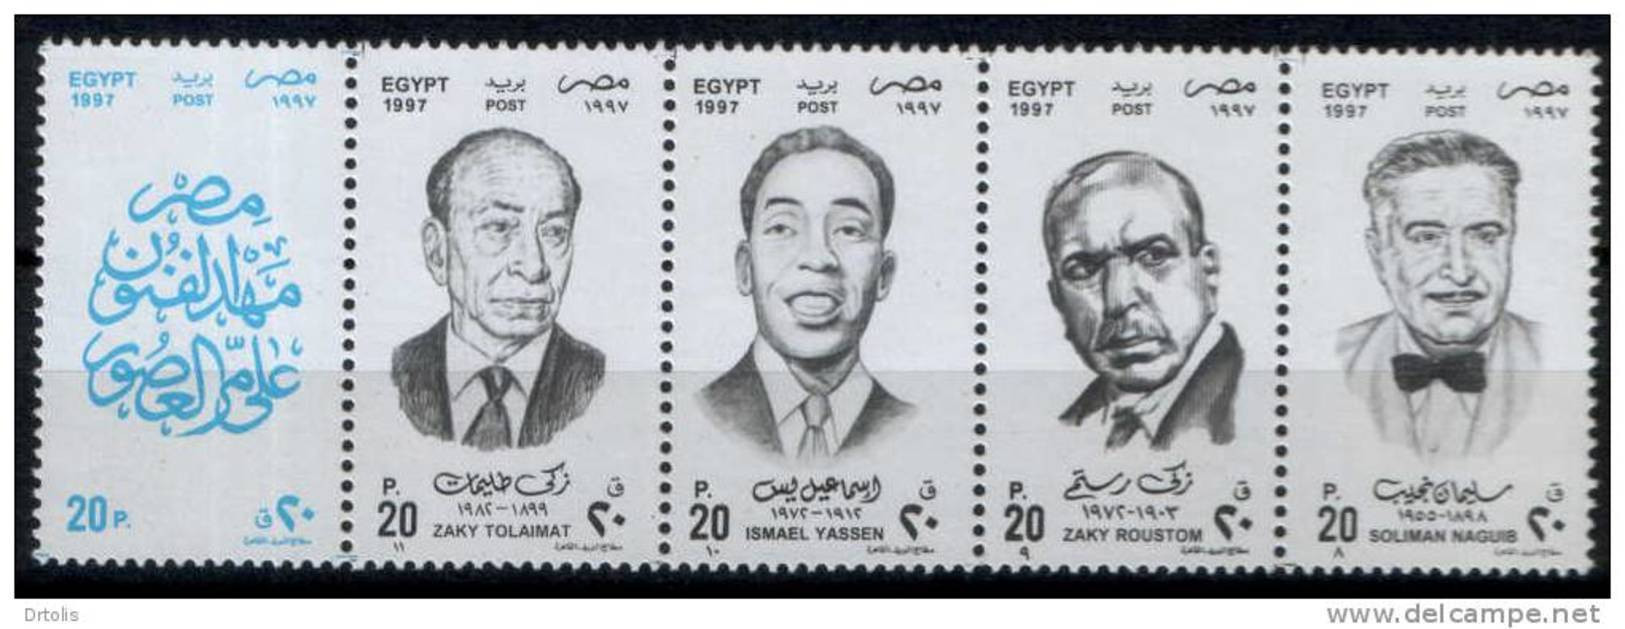 EGYPT / 1997 / COMPLETE YEAR ISSUES / MNH / VF / 9 SCANS . - Neufs